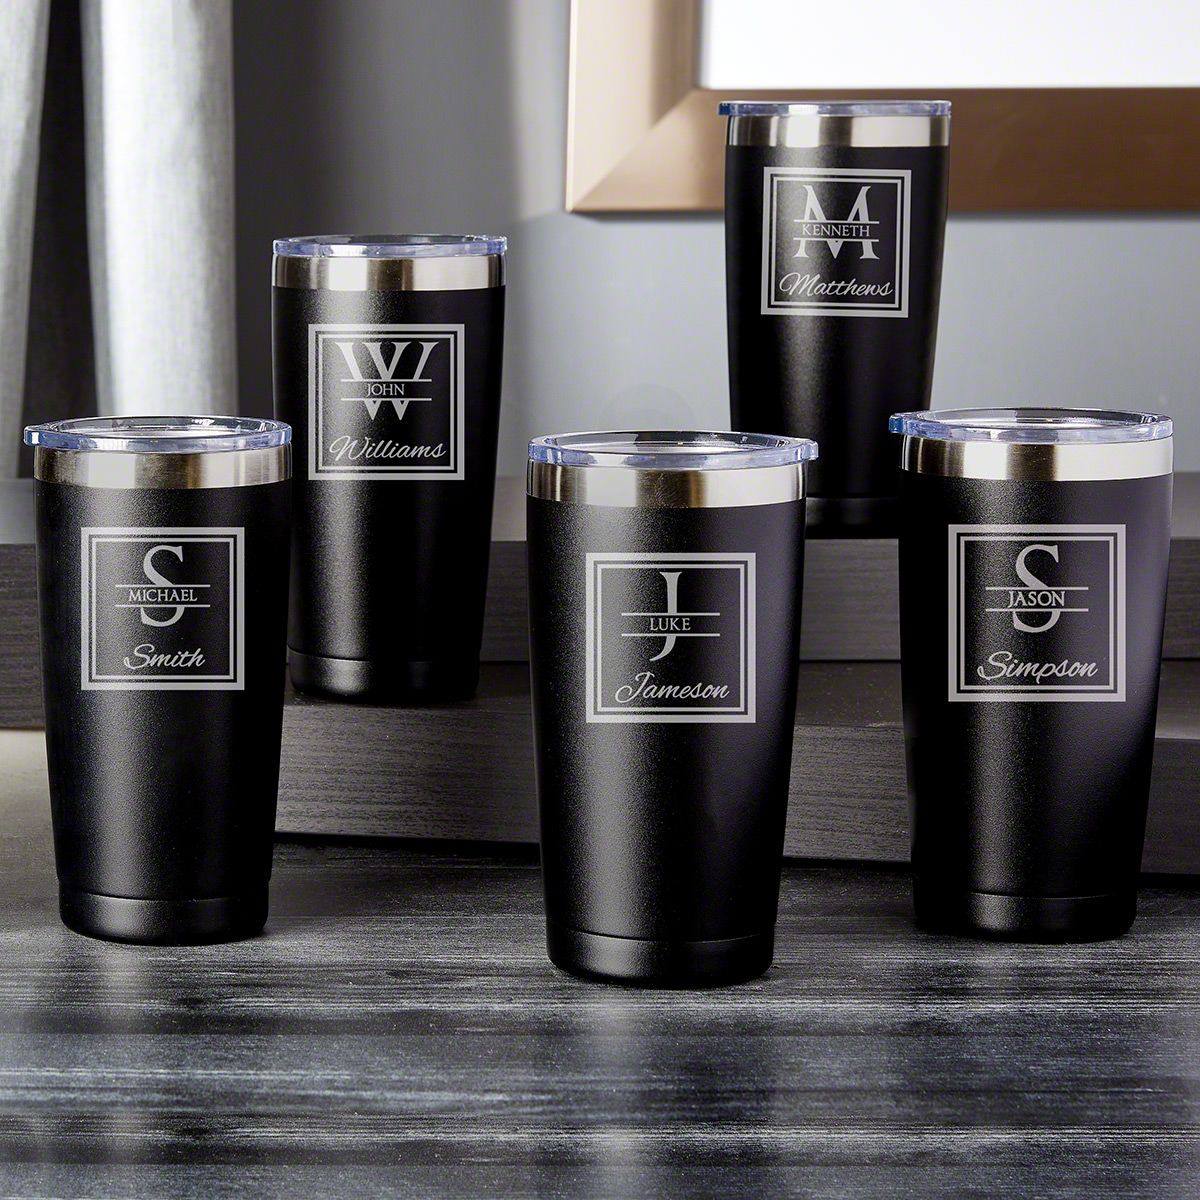 https://images.homewetbar.com/media/catalog/product/o/a/oakhill-blackout-coffee-tumblers_-set-of-5-p_7652.jpg?store=default&image-type=image